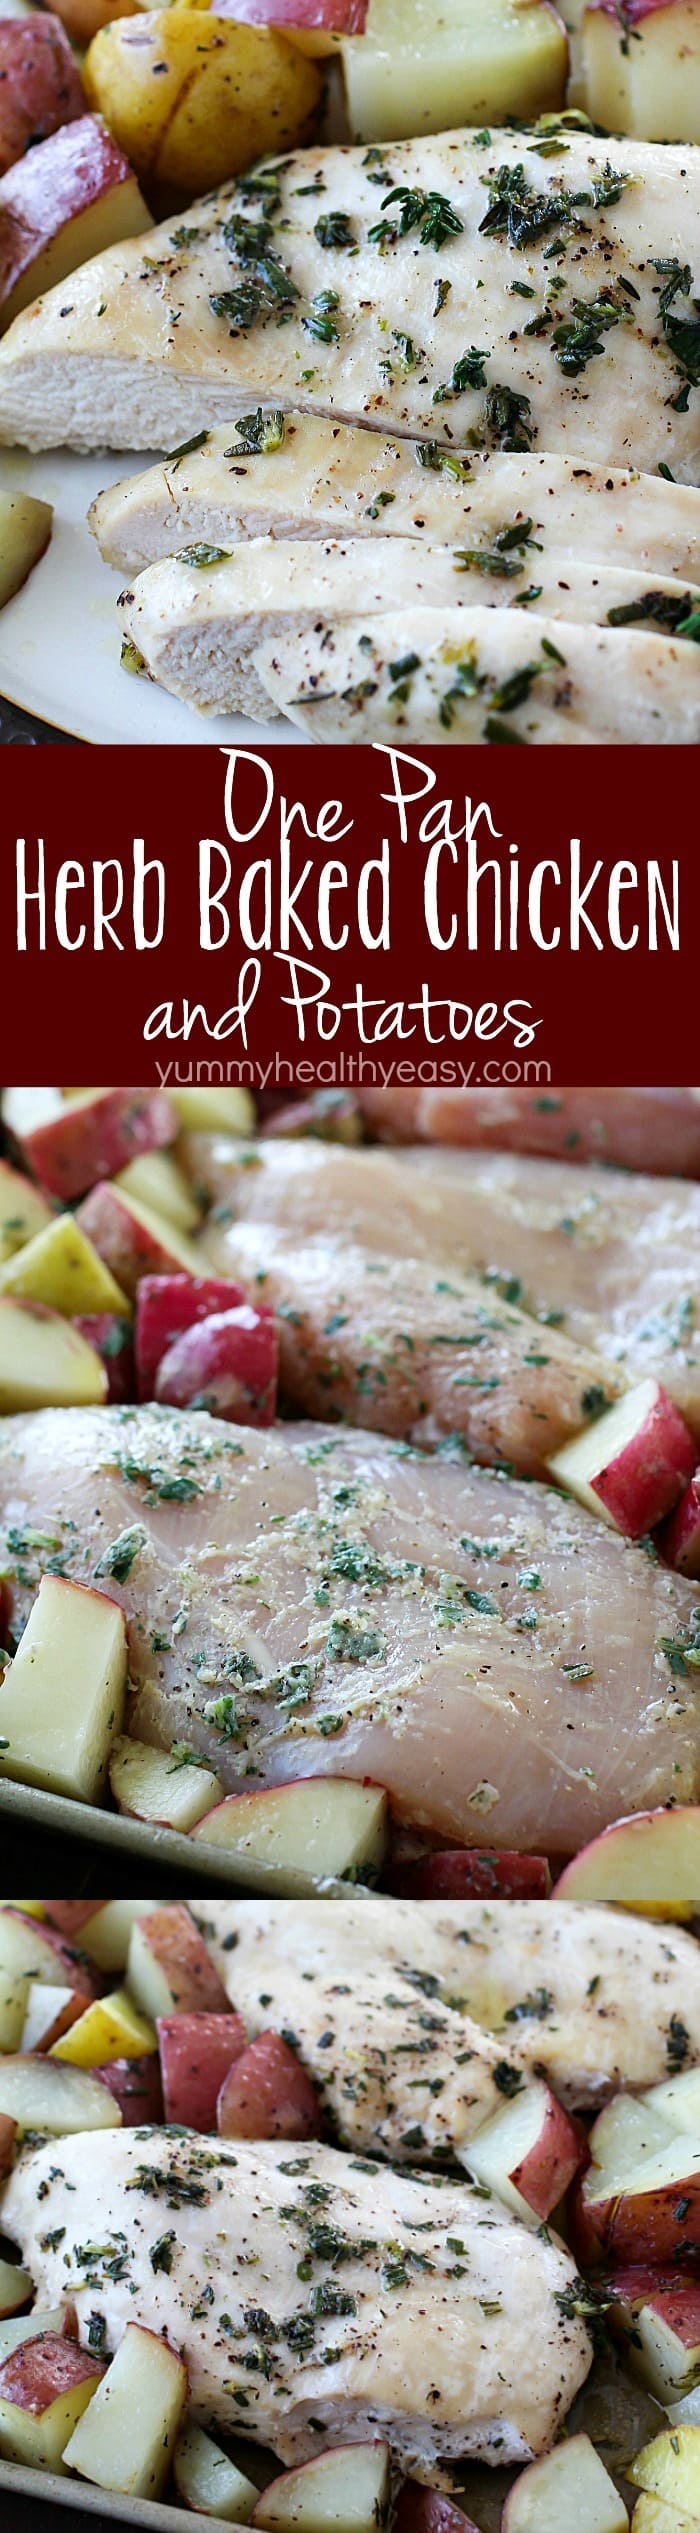 One-Pan Herb Baked Chicken and Potatoes makes making dinner a breeze! Chicken and potatoes are coated in a delicious salty herb rub and baked in one pan. The baked chicken is tender and juicy and the potatoes have so much flavor. This is an easy dinner everyone will love! AD